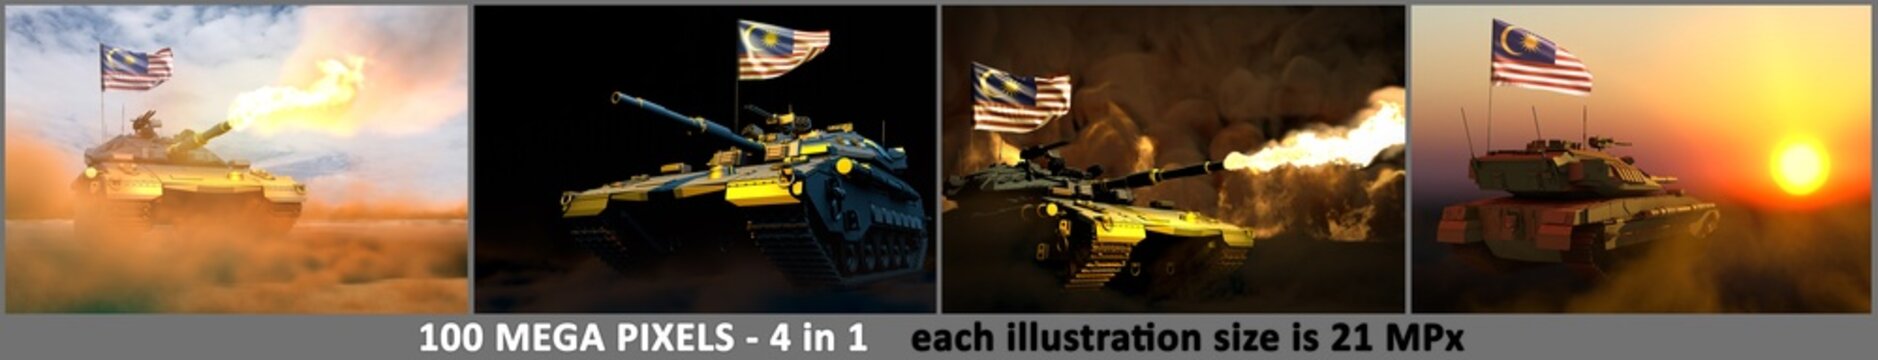 Malaysia army concept - 4 high detail pictures of tank with fictive design with Malaysia flag and free place for your text, military 3D Illustration